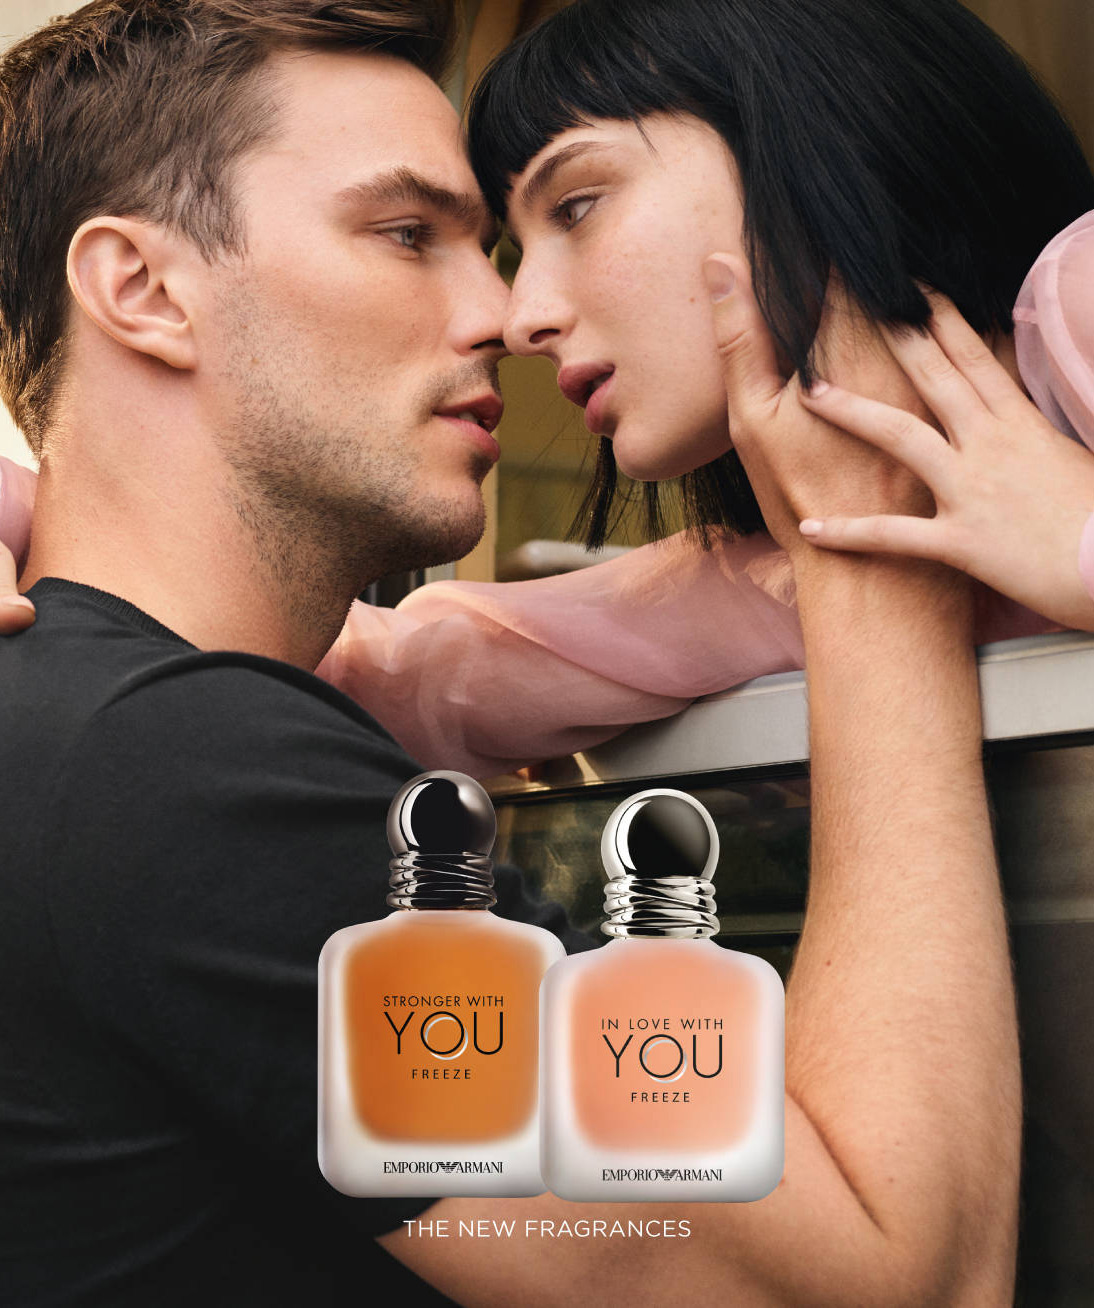 Духи `Emporio Armani` Stronger with You Freeze, 100 мл